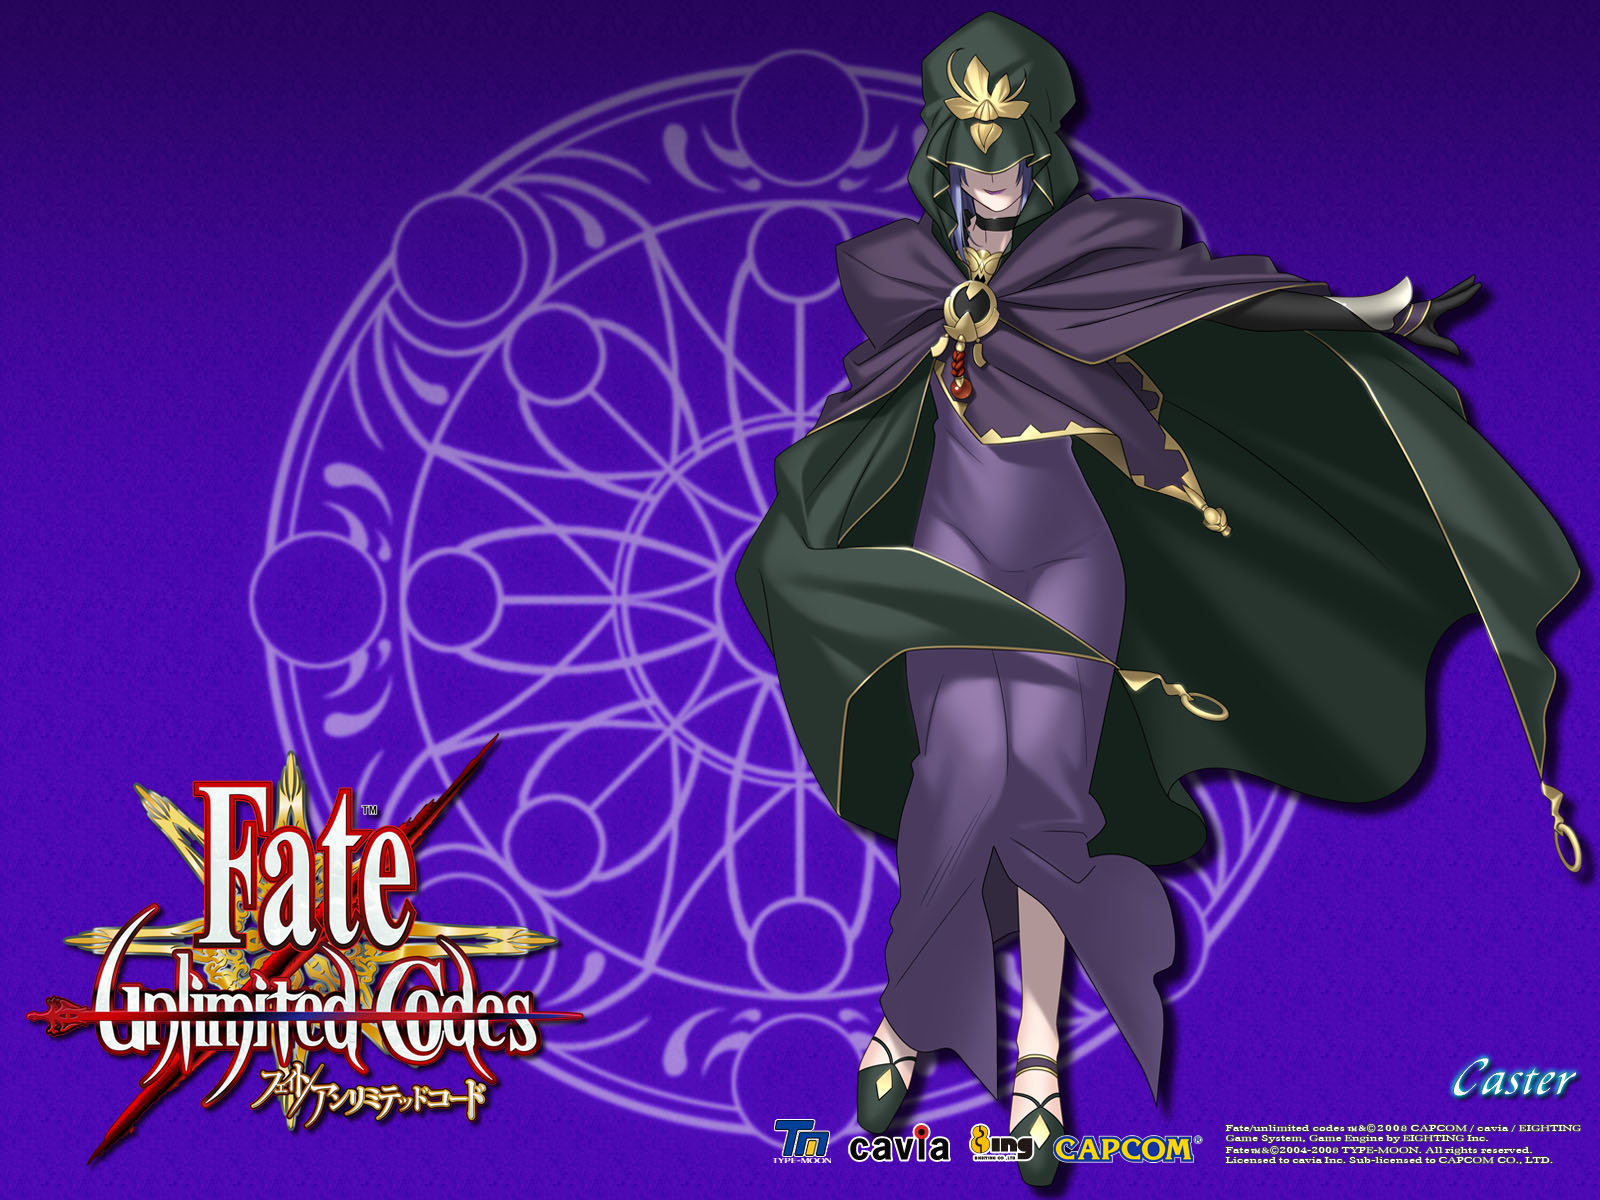 Fate unlimited Codes HD wallpapers, Desktop wallpaper - most viewed